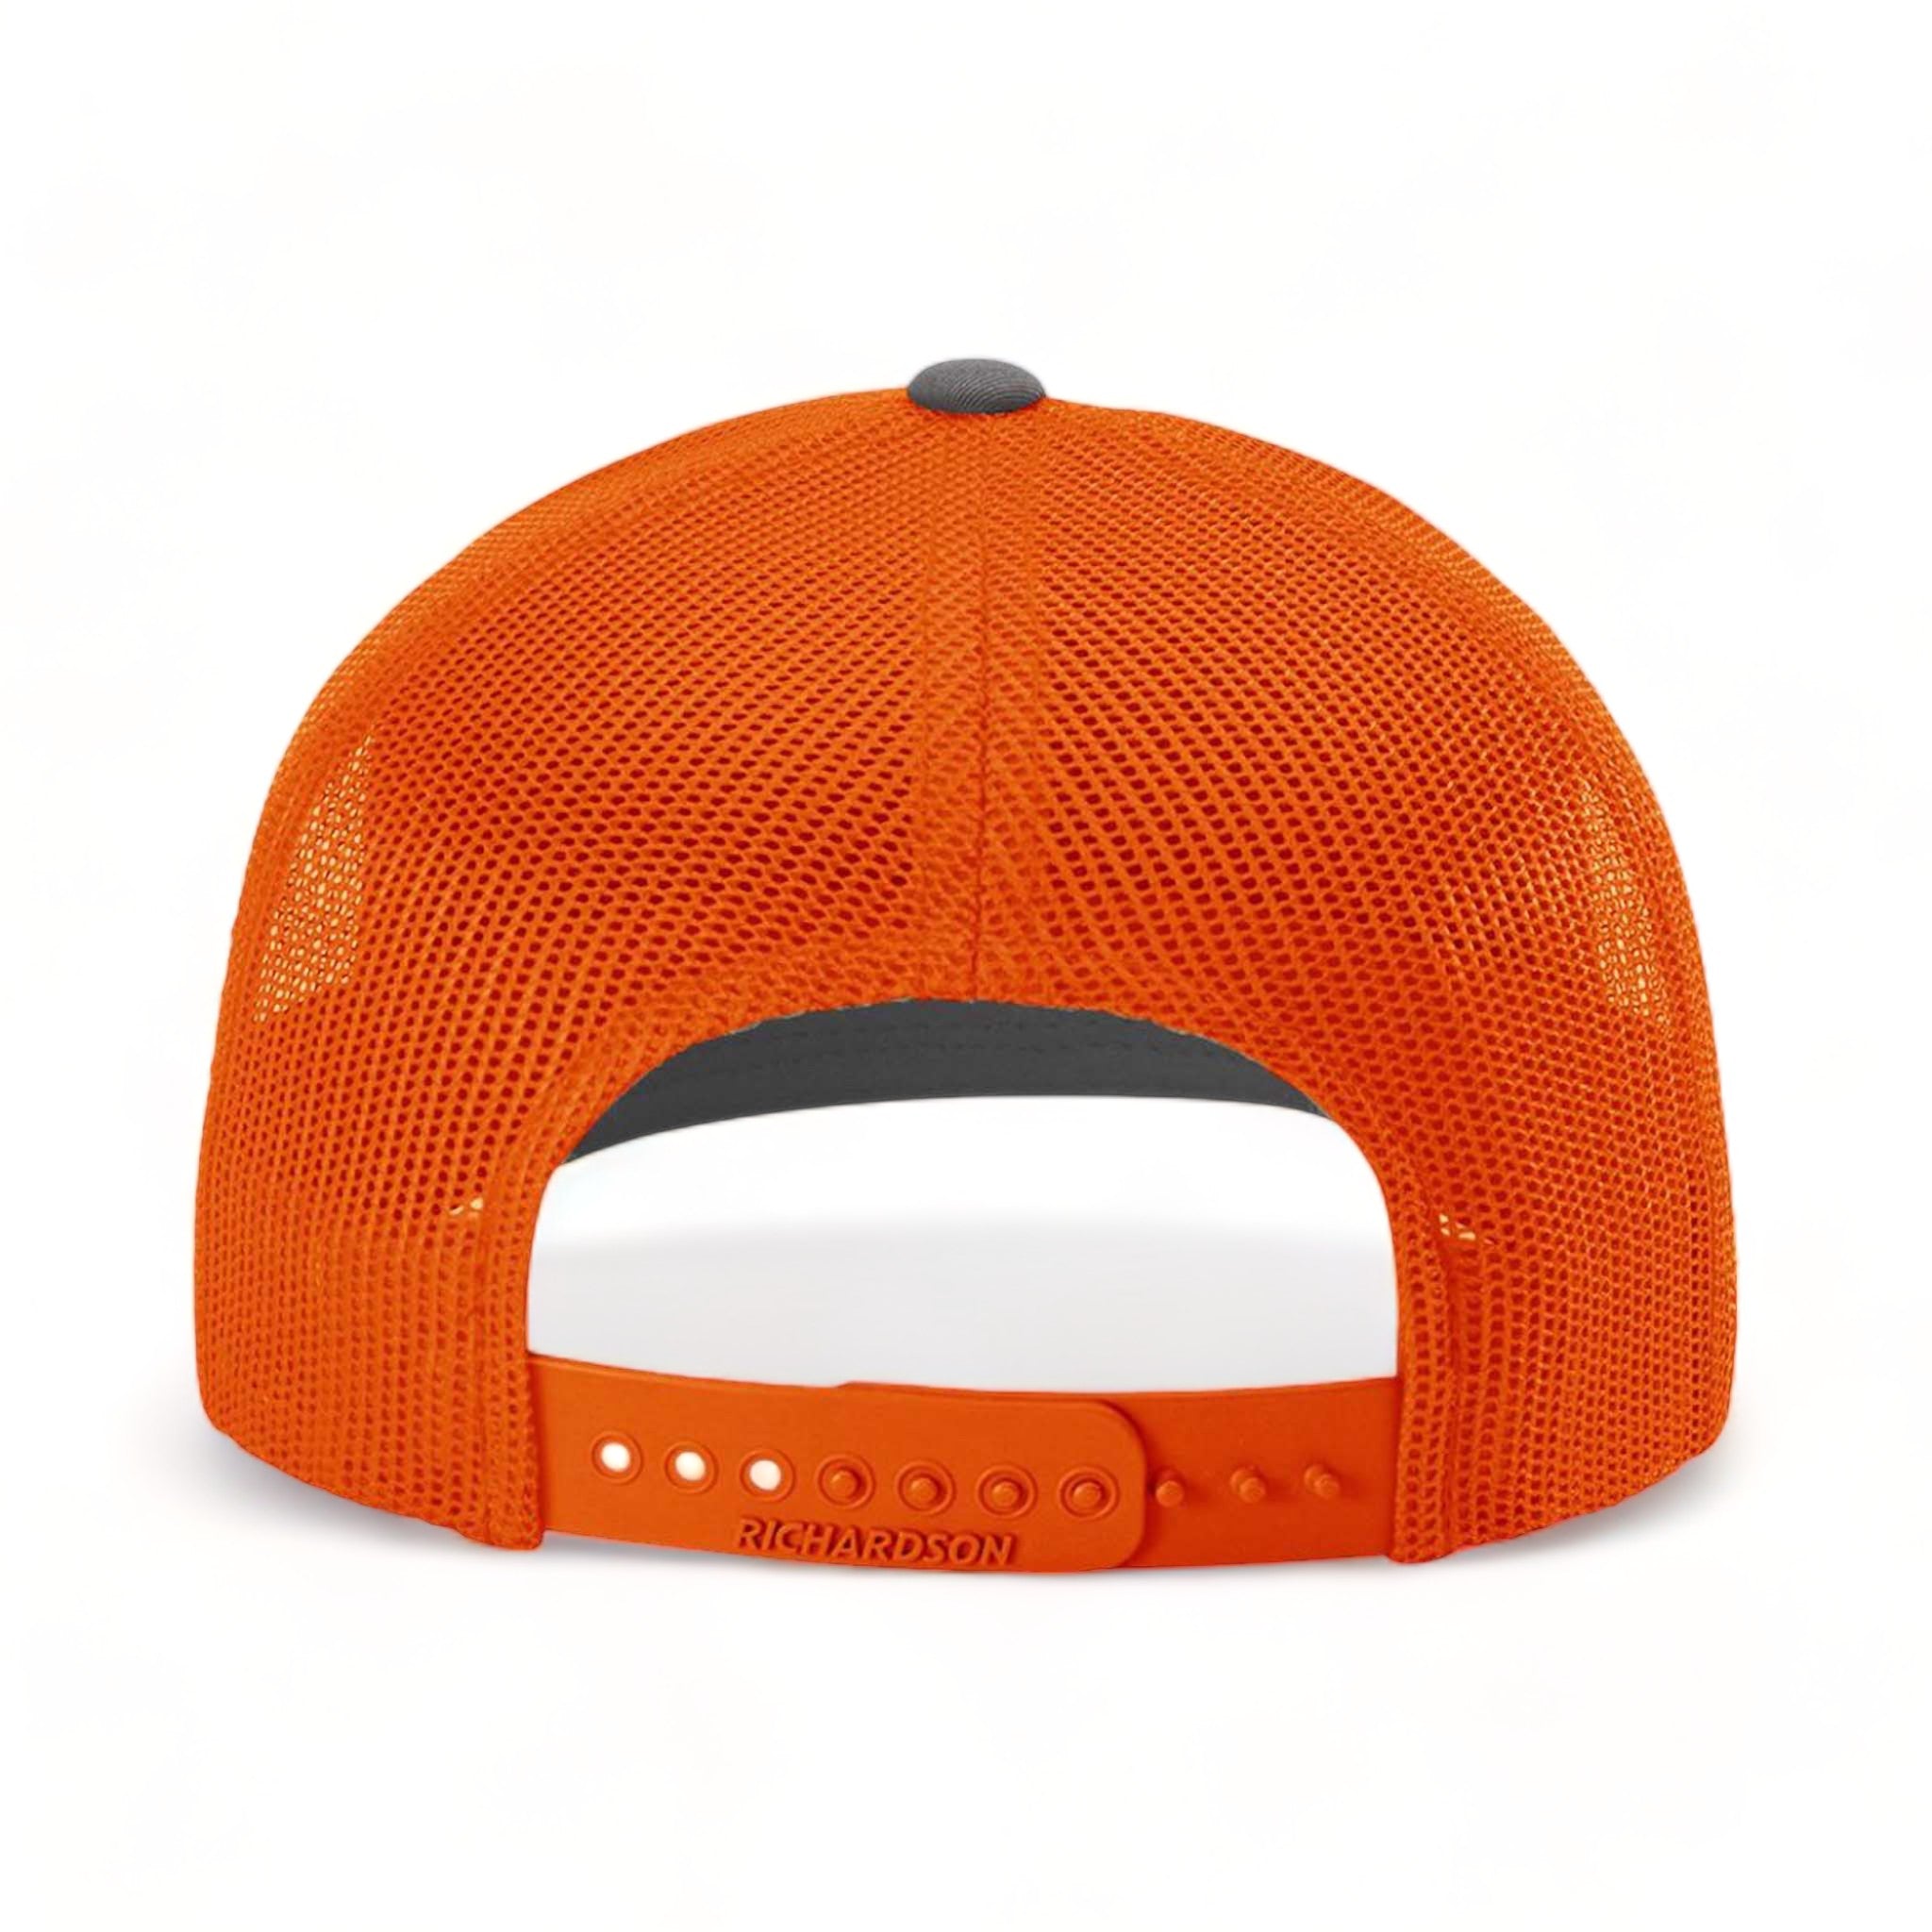 Back view of Richardson 112 custom hat in charcoal and orange